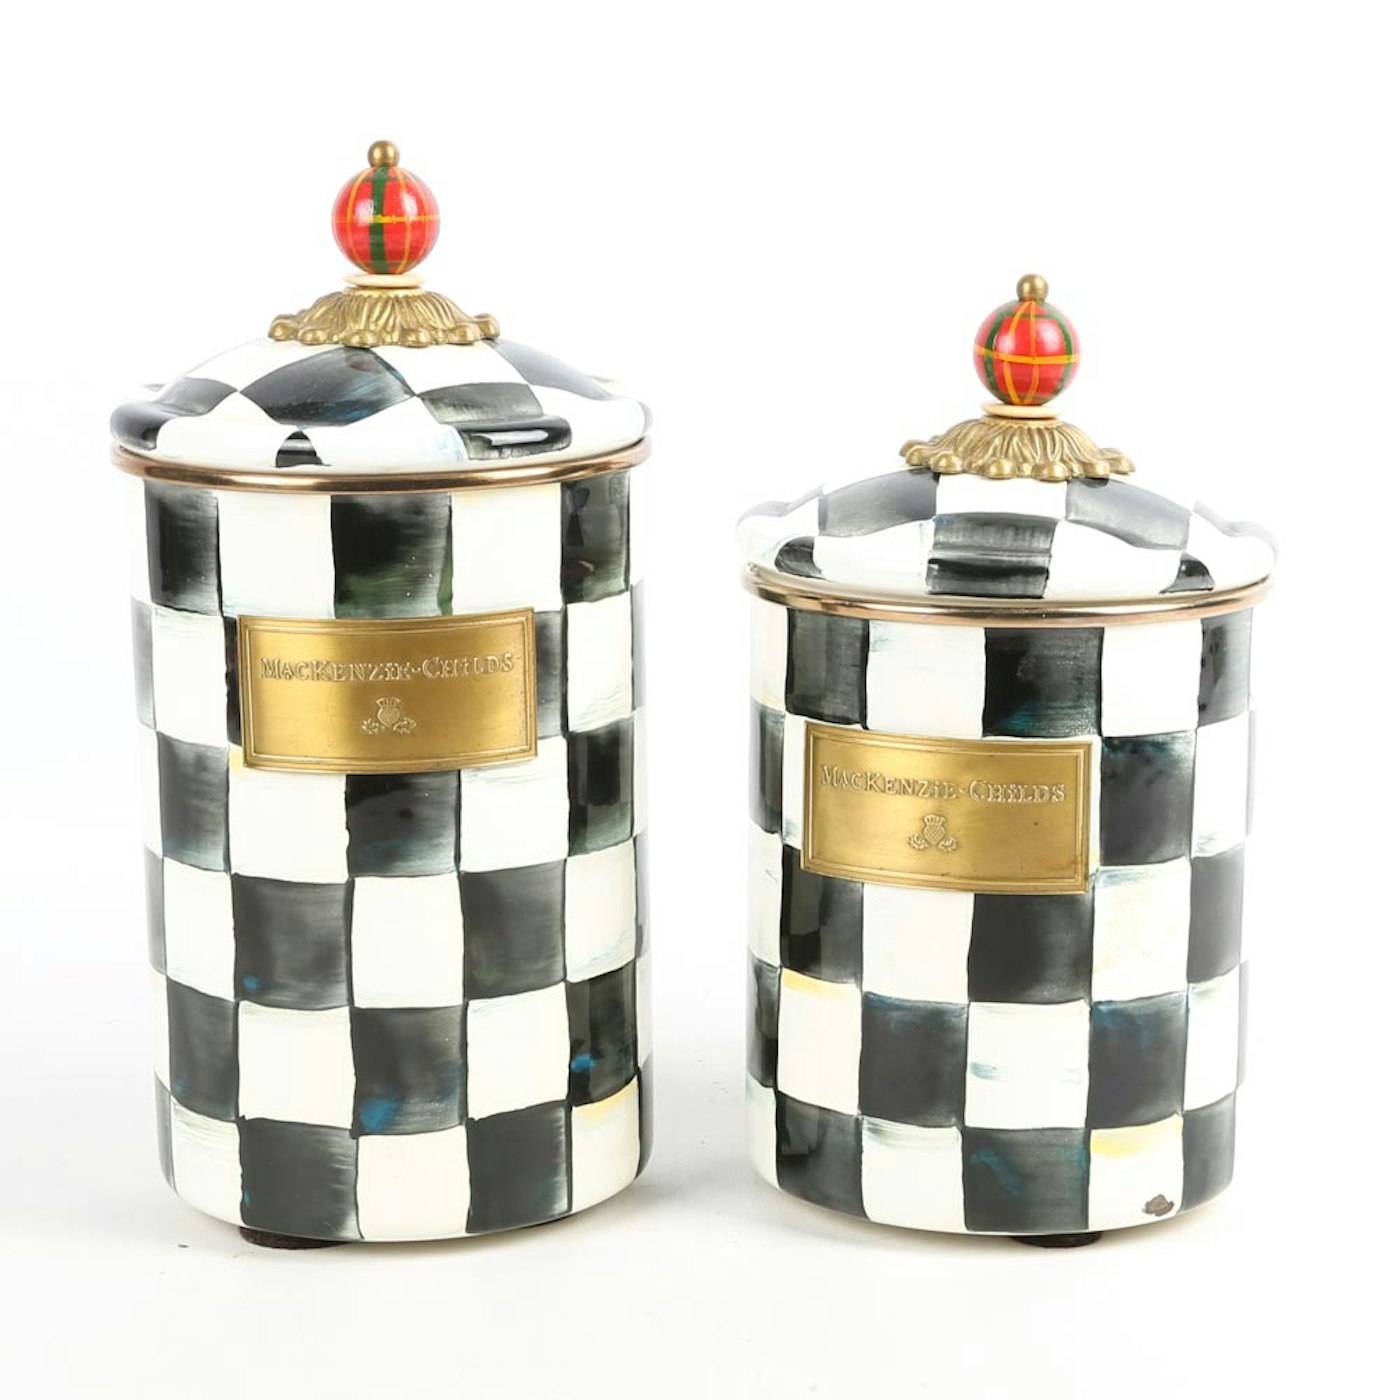 MacKenzie Childs quot Courtly Check quot Canisters EBTH